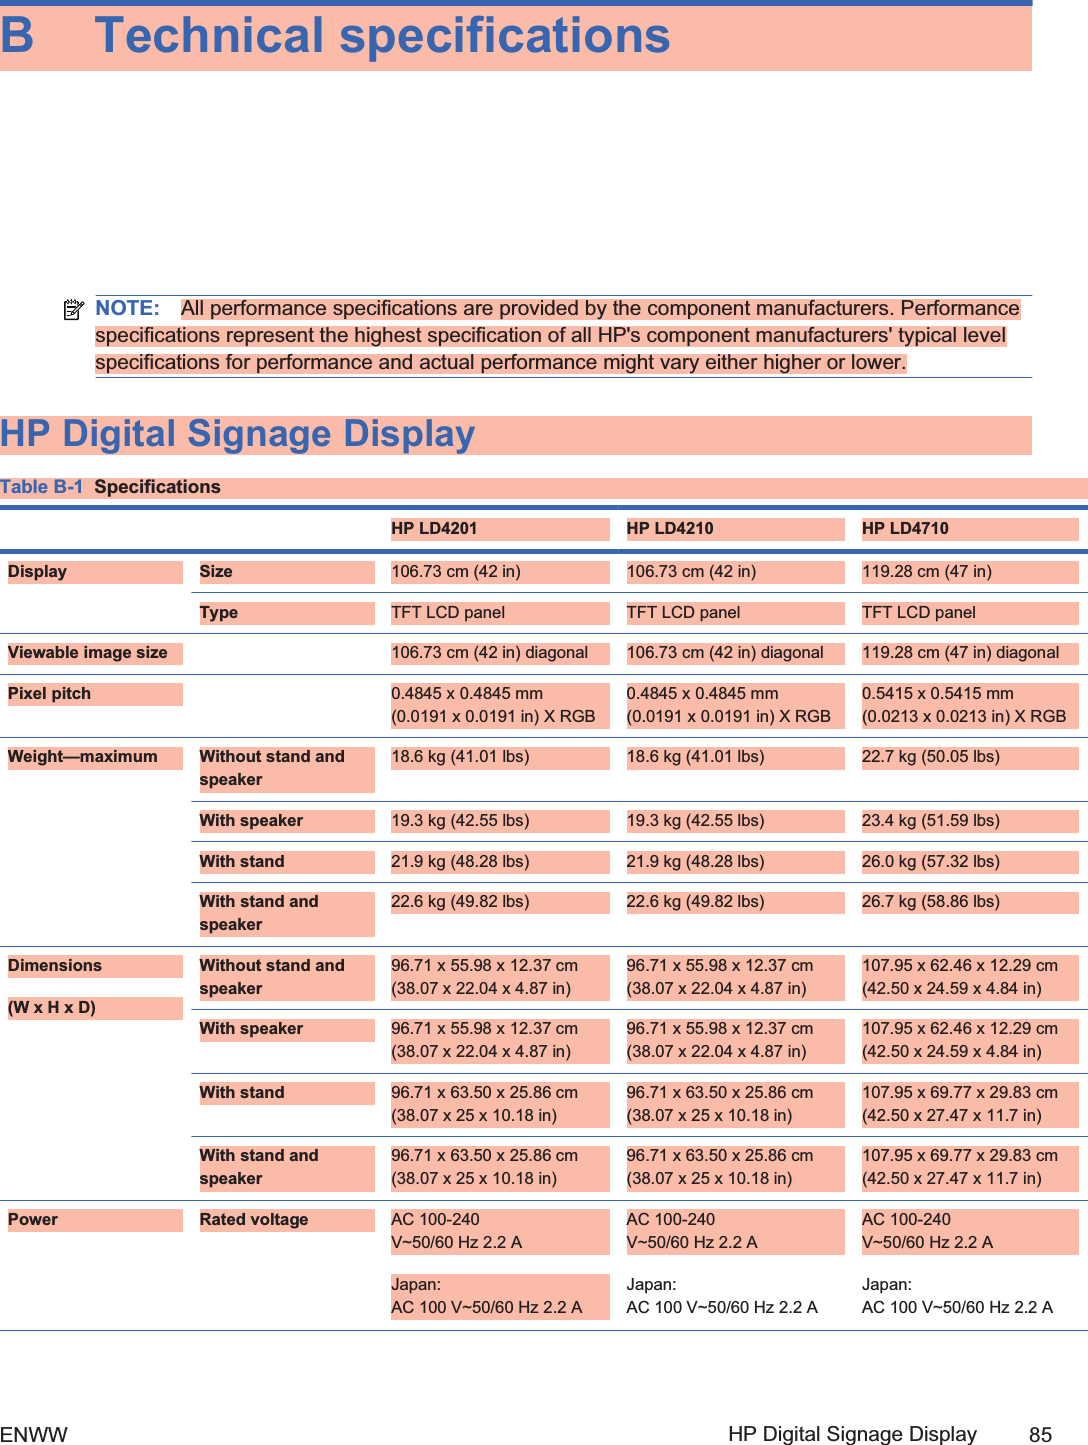 B Technical specificationsNOTE: All performance specifications are provided by the component manufacturers. Performancespecifications represent the highest specification of all HP&apos;s component manufacturers&apos; typical levelspecifications for performance and actual performance might vary either higher or lower.HP Digital Signage DisplayTable B-1  Specifications  HP LD4201 HP LD4210 HP LD4710Display Size 106.73 cm (42 in) 106.73 cm (42 in) 119.28 cm (47 in)Type TFT LCD panel TFT LCD panel TFT LCD panelViewable image size  106.73 cm (42 in) diagonal 106.73 cm (42 in) diagonal 119.28 cm (47 in) diagonalPixel pitch  0.4845 x 0.4845 mm(0.0191 x 0.0191 in) X RGB0.4845 x 0.4845 mm(0.0191 x 0.0191 in) X RGB0.5415 x 0.5415 mm(0.0213 x 0.0213 in) X RGBWeight—maximum Without stand andspeaker18.6 kg (41.01 lbs) 18.6 kg (41.01 lbs) 22.7 kg (50.05 lbs)With speaker 19.3 kg (42.55 lbs) 19.3 kg (42.55 lbs) 23.4 kg (51.59 lbs)With stand 21.9 kg (48.28 lbs) 21.9 kg (48.28 lbs) 26.0 kg (57.32 lbs)With stand andspeaker22.6 kg (49.82 lbs) 22.6 kg (49.82 lbs) 26.7 kg (58.86 lbs)Dimensions(W x H x D)Without stand andspeaker96.71 x 55.98 x 12.37 cm(38.07 x 22.04 x 4.87 in)96.71 x 55.98 x 12.37 cm(38.07 x 22.04 x 4.87 in)107.95 x 62.46 x 12.29 cm(42.50 x 24.59 x 4.84 in)With speaker 96.71 x 55.98 x 12.37 cm(38.07 x 22.04 x 4.87 in)96.71 x 55.98 x 12.37 cm(38.07 x 22.04 x 4.87 in)107.95 x 62.46 x 12.29 cm(42.50 x 24.59 x 4.84 in)With stand 96.71 x 63.50 x 25.86 cm(38.07 x 25 x 10.18 in)96.71 x 63.50 x 25.86 cm(38.07 x 25 x 10.18 in)107.95 x 69.77 x 29.83 cm(42.50 x 27.47 x 11.7 in)With stand andspeaker96.71 x 63.50 x 25.86 cm(38.07 x 25 x 10.18 in)96.71 x 63.50 x 25.86 cm(38.07 x 25 x 10.18 in)107.95 x 69.77 x 29.83 cm(42.50 x 27.47 x 11.7 in)Power Rated voltage AC 100-240V~50/60 Hz 2.2 AJapan:AC 100 V~50/60 Hz 2.2 AAC 100-240V~50/60 Hz 2.2 AJapan:AC 100 V~50/60 Hz 2.2 AAC 100-240V~50/60 Hz 2.2 AJapan:AC 100 V~50/60 Hz 2.2 AENWW HP Digital Signage Display 85Draft